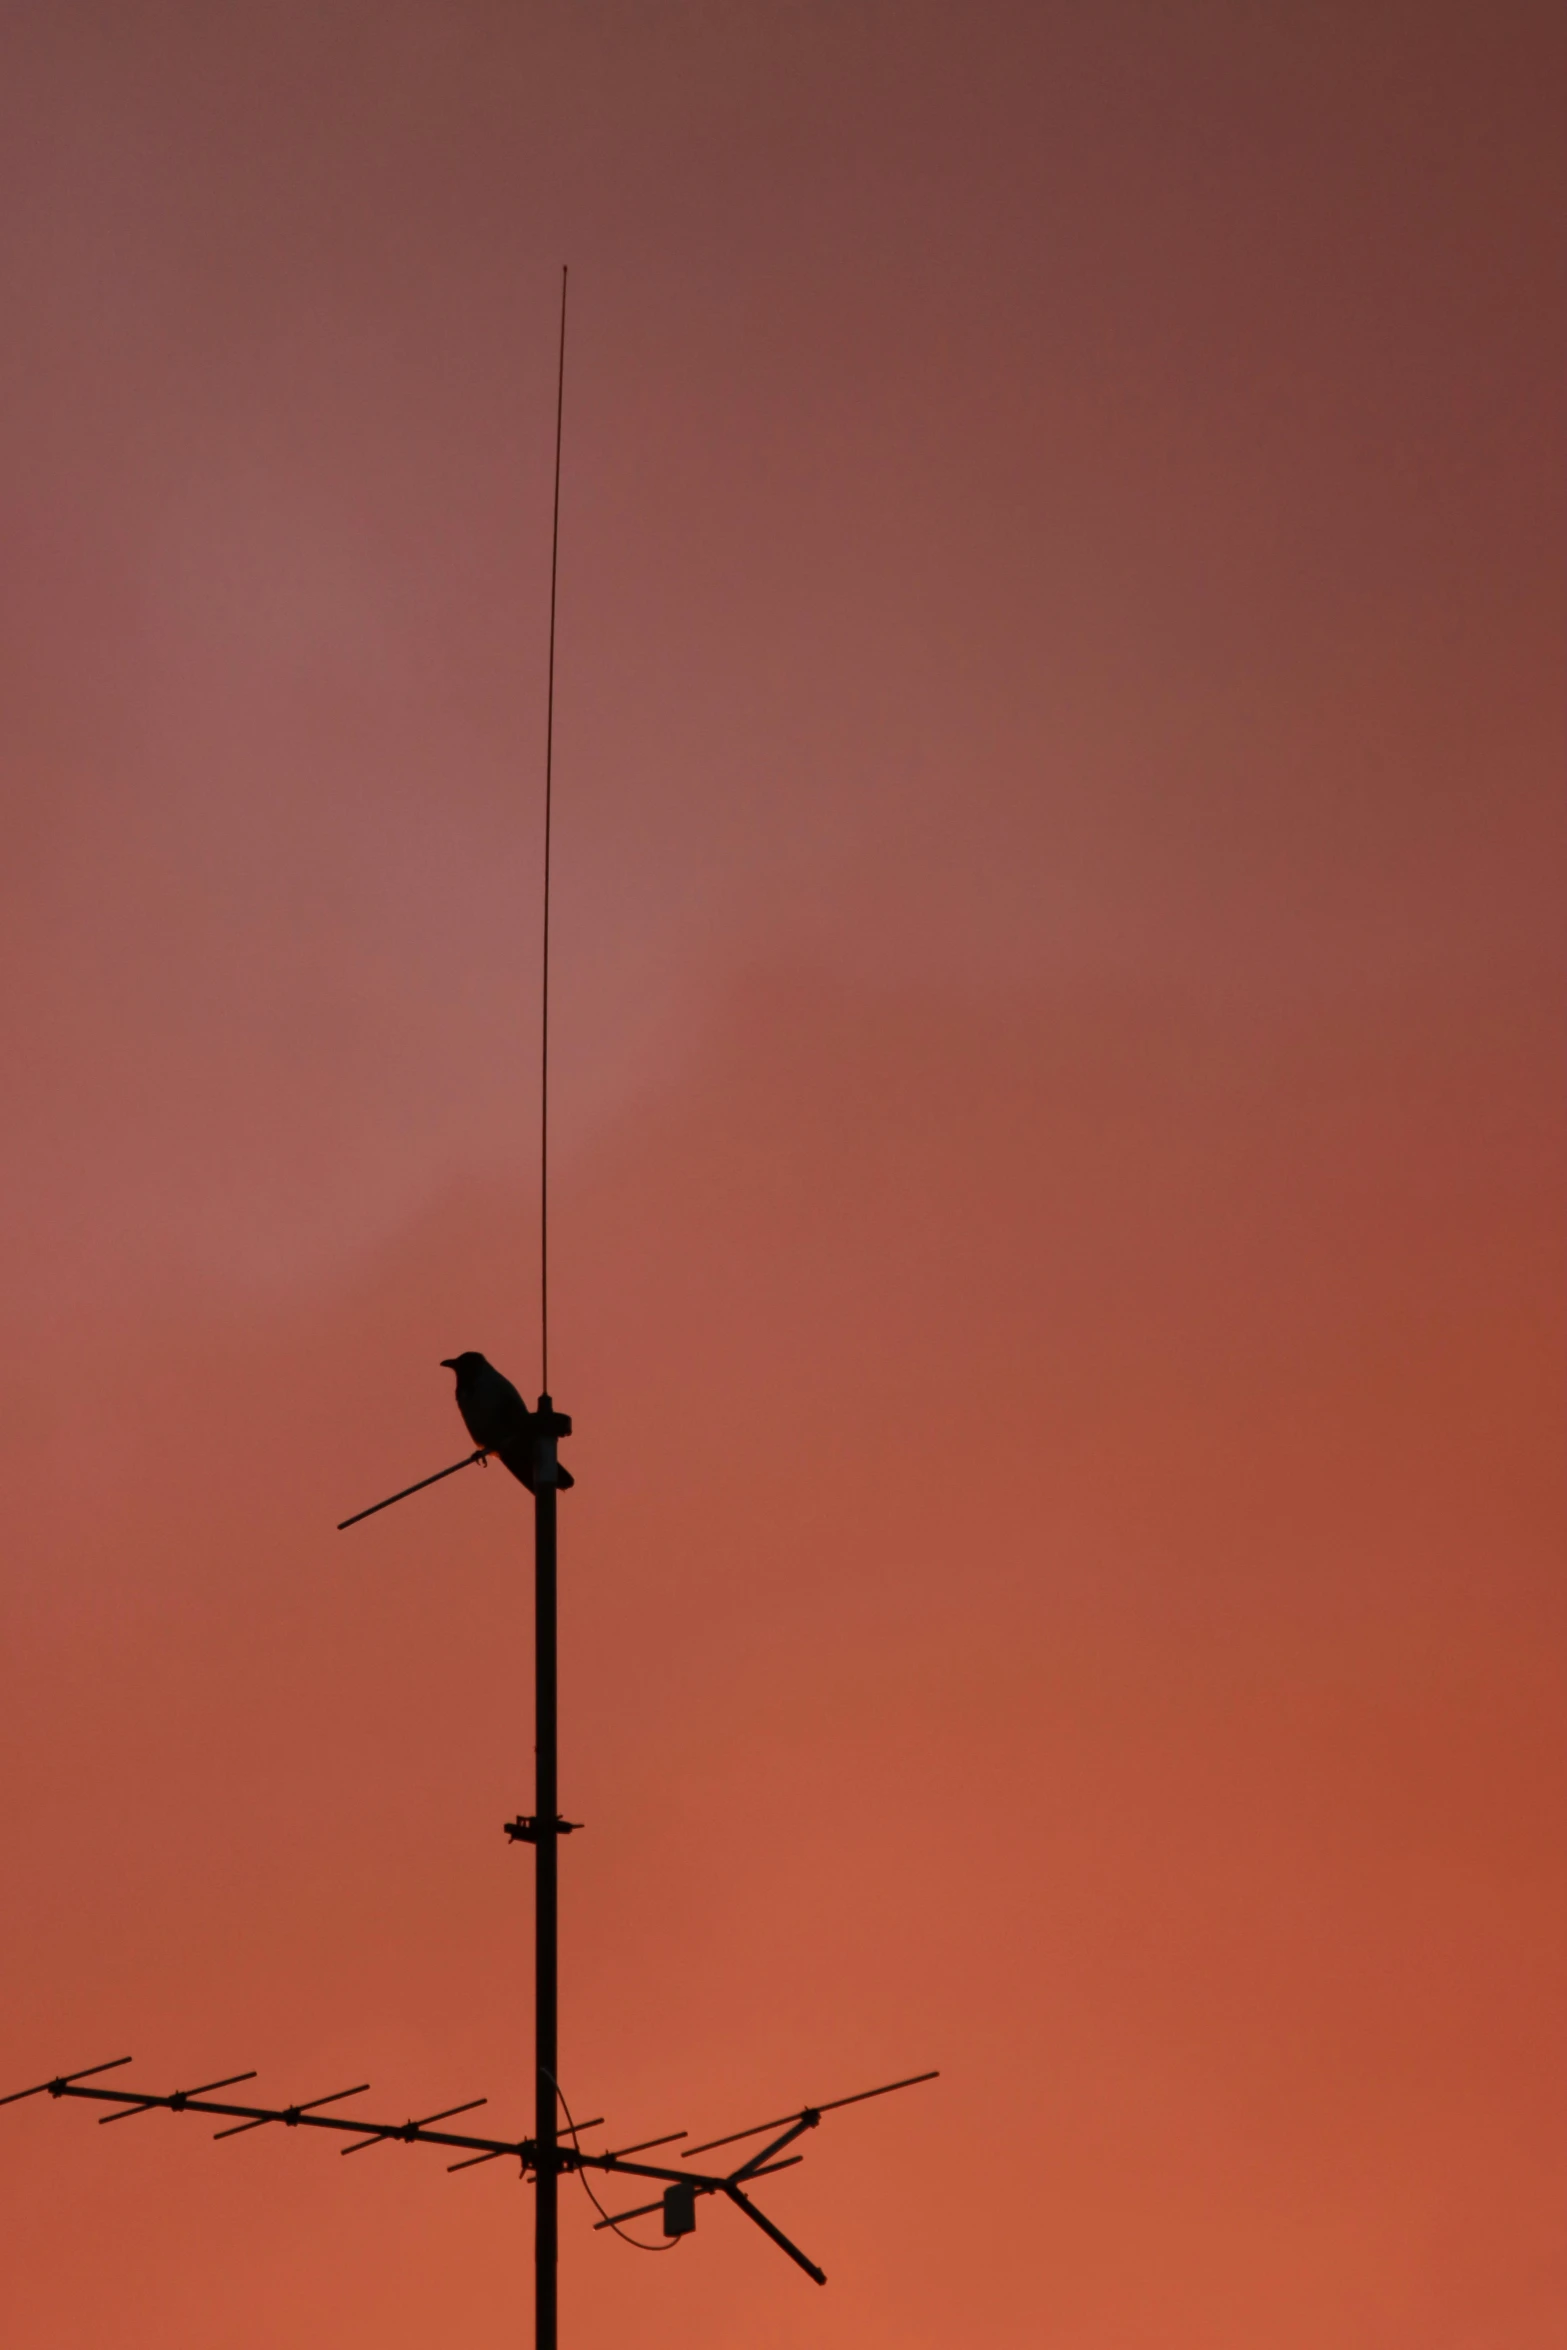 the silhouette of a tall antenna pole with birds on top